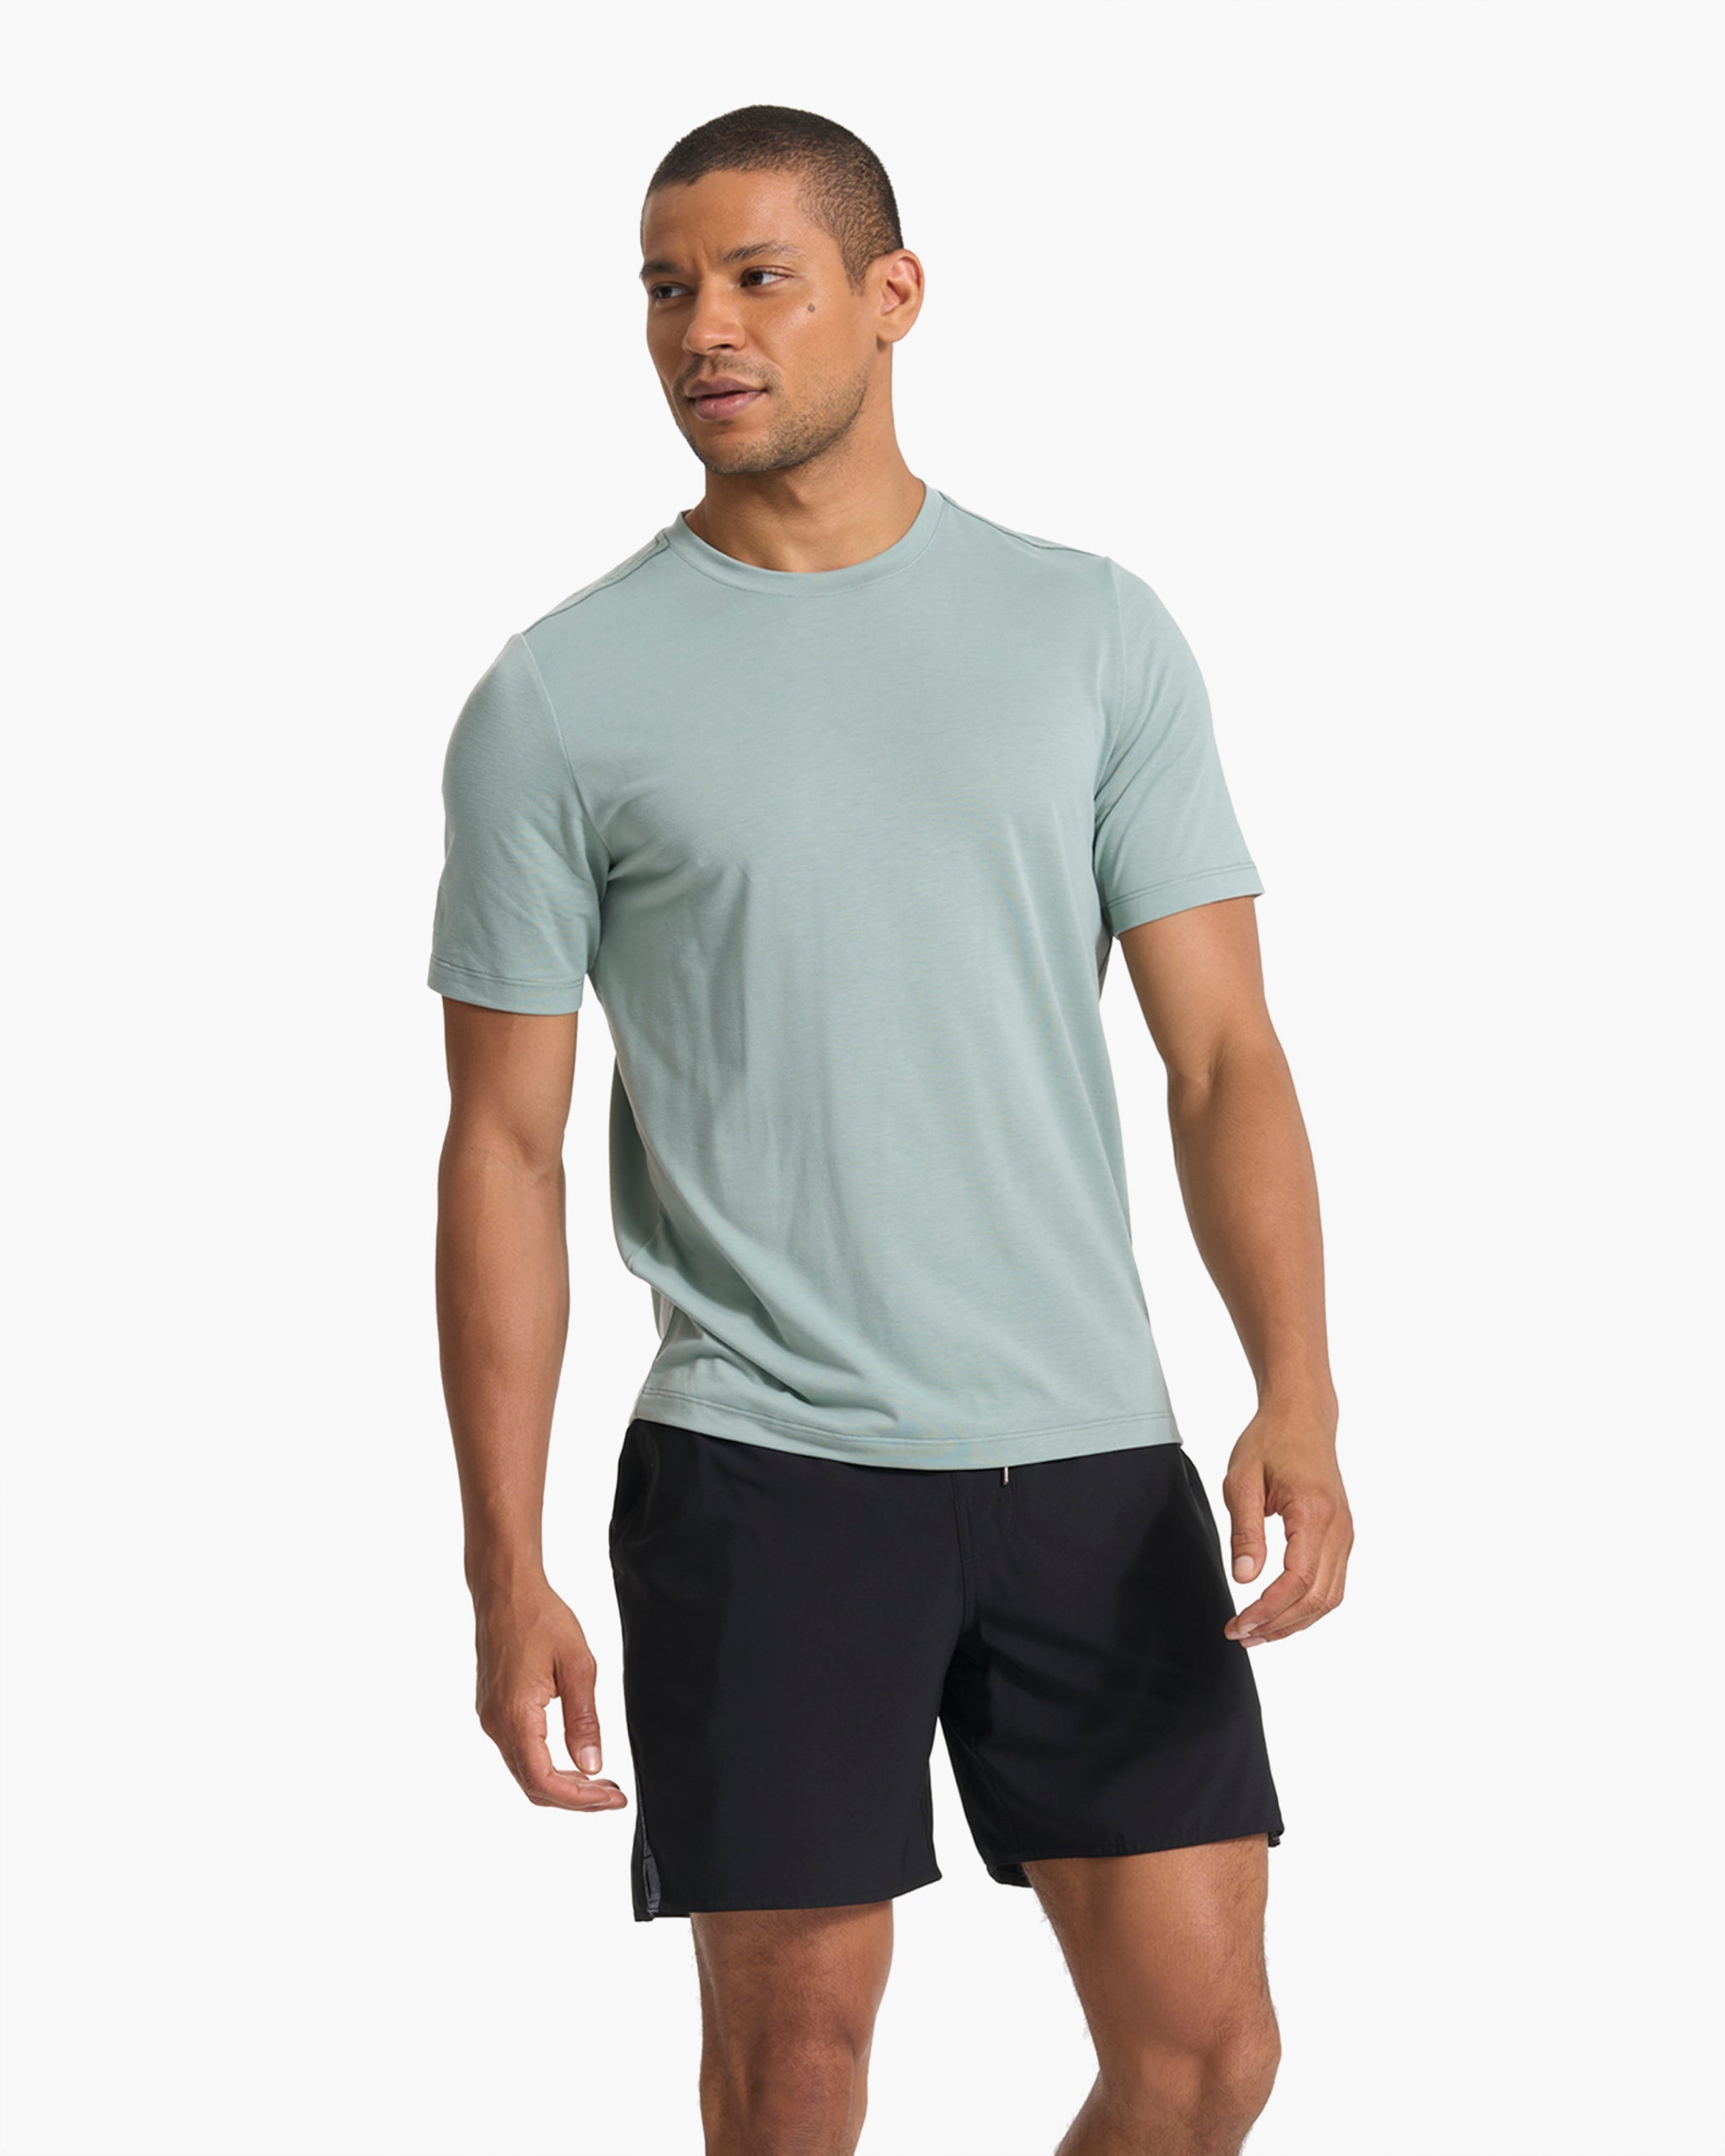 Men's YPB powerSOFT Lifting Tee, Men's Clearance